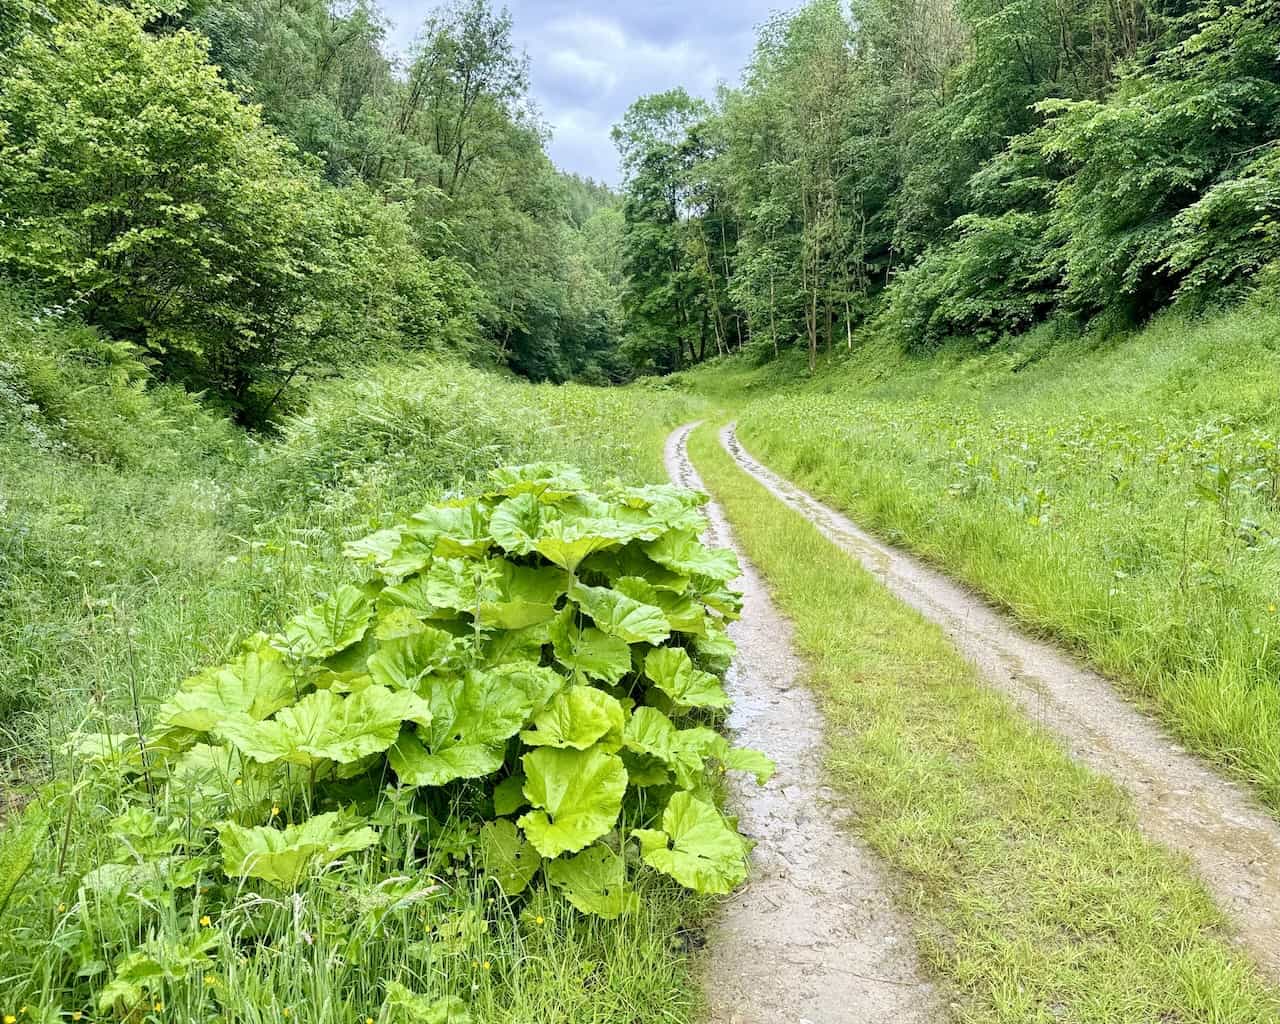 The track south through Beck Dale is similar to Ash Dale, easy to follow, and it meanders through the woods generally following the course of Borough Beck back to Helmsley.